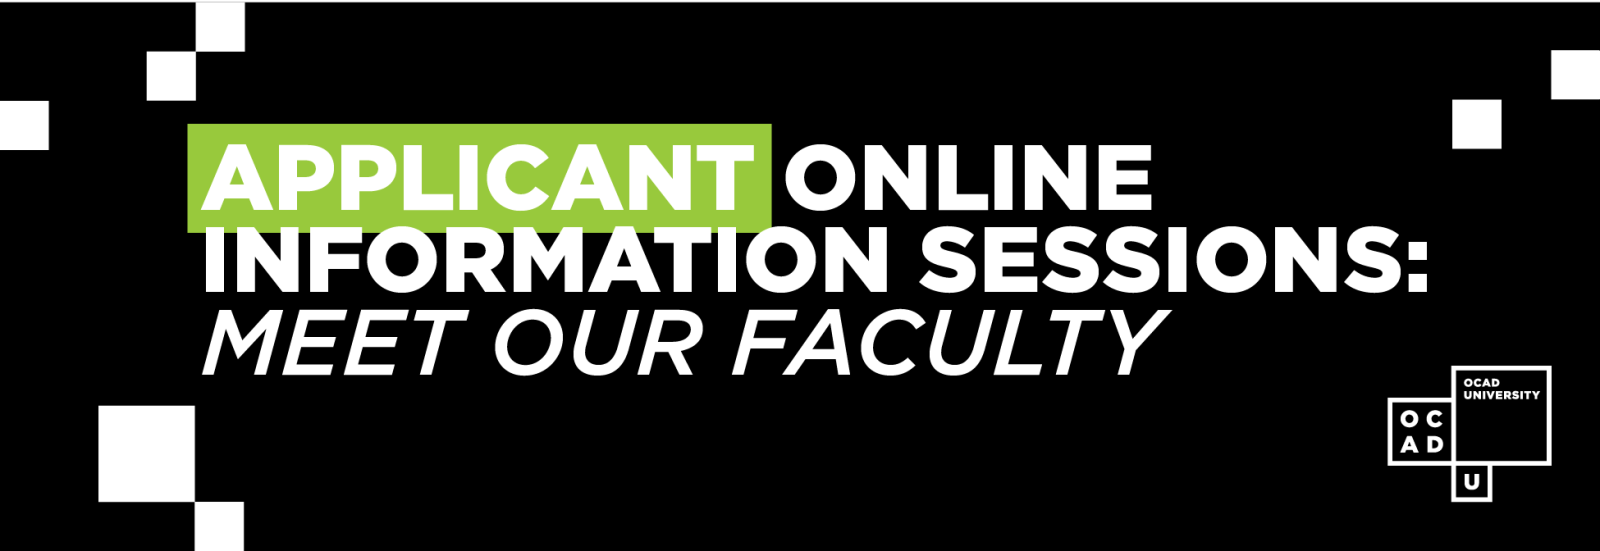 Applicant Online Information Sessions: Meet Our Faculty